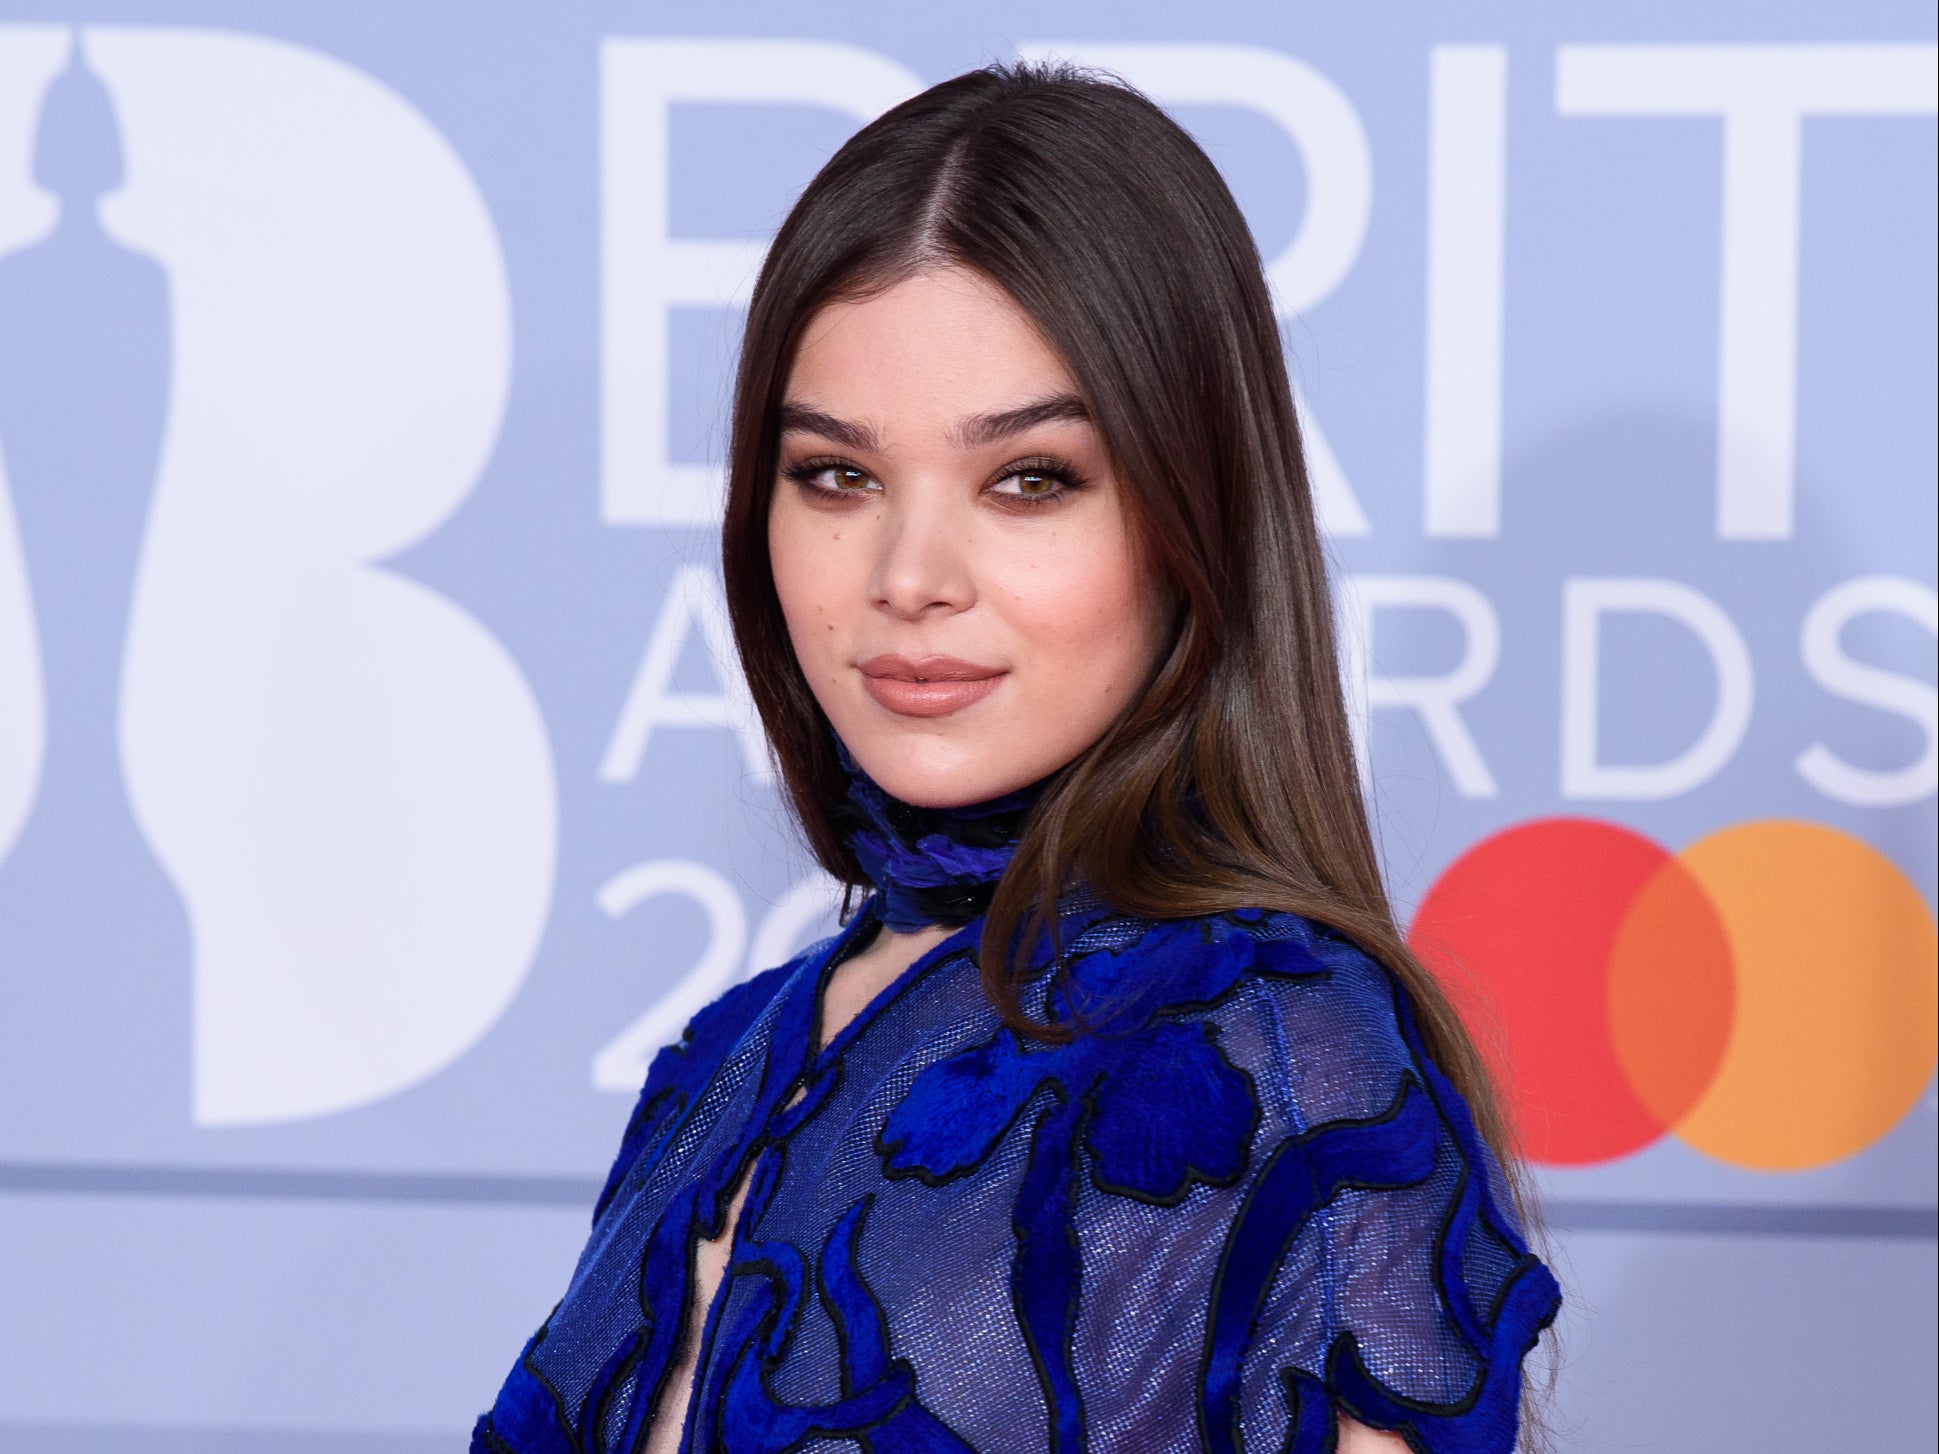 Hailee Steinfeld pictured earlier this year attending the Brit Awards 2020